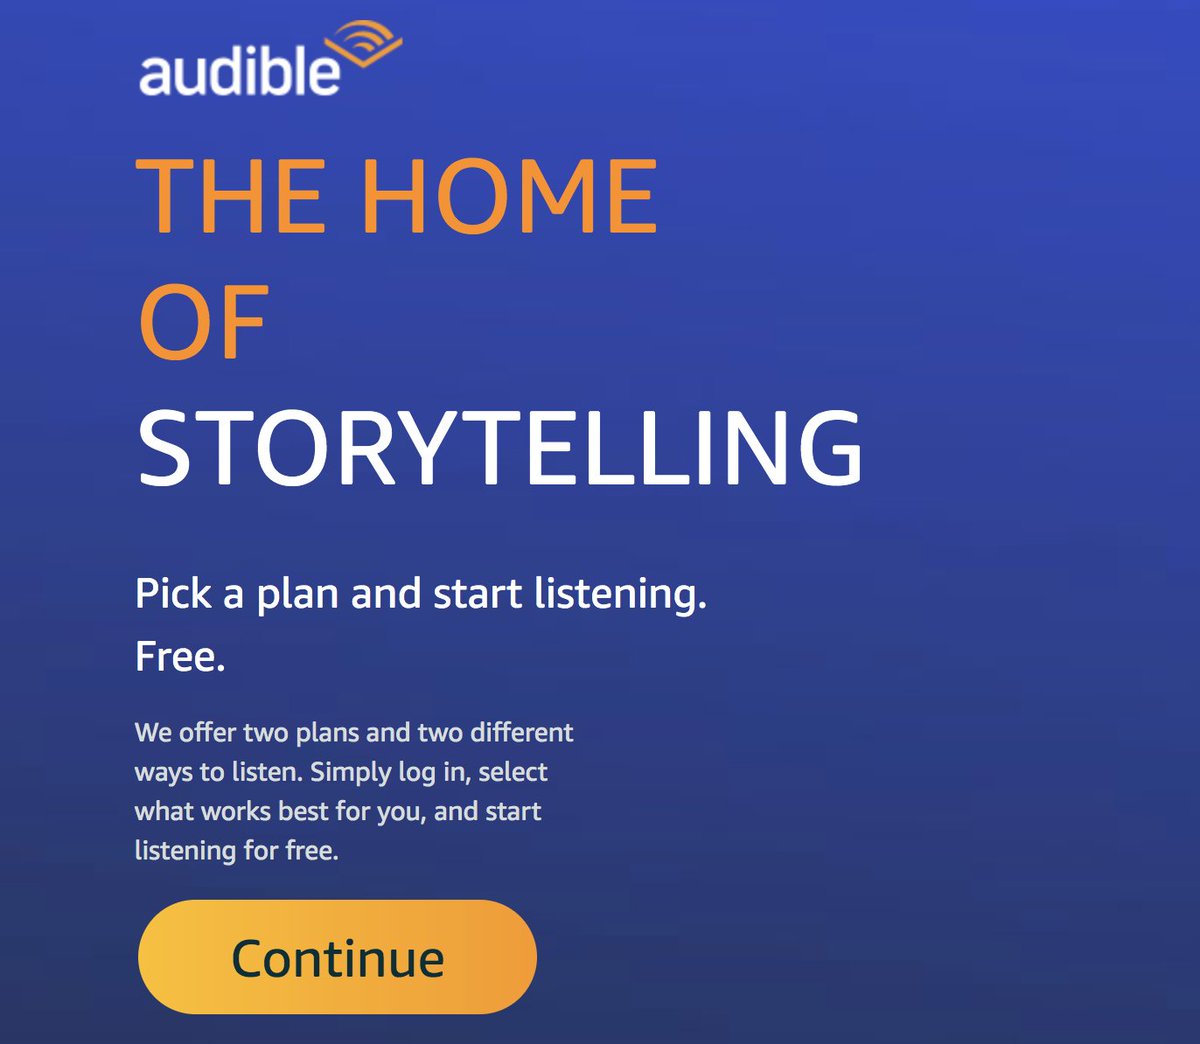 AUDIBLE - The Home of Storytelling
FREE: amzn.to/3L1Dp3m

#AmazonAudible
#Audiobooks
#ListenEverywhere
#AudibleOriginals
#AudioContent
#Podcasts
#Storytelling
#ReadingOnTheGo
#AudibleSubscription
#AudiobookLover
#ListenUp
#NarrationMagic
#AudibleEscape
#AudibleApp
#Podcas